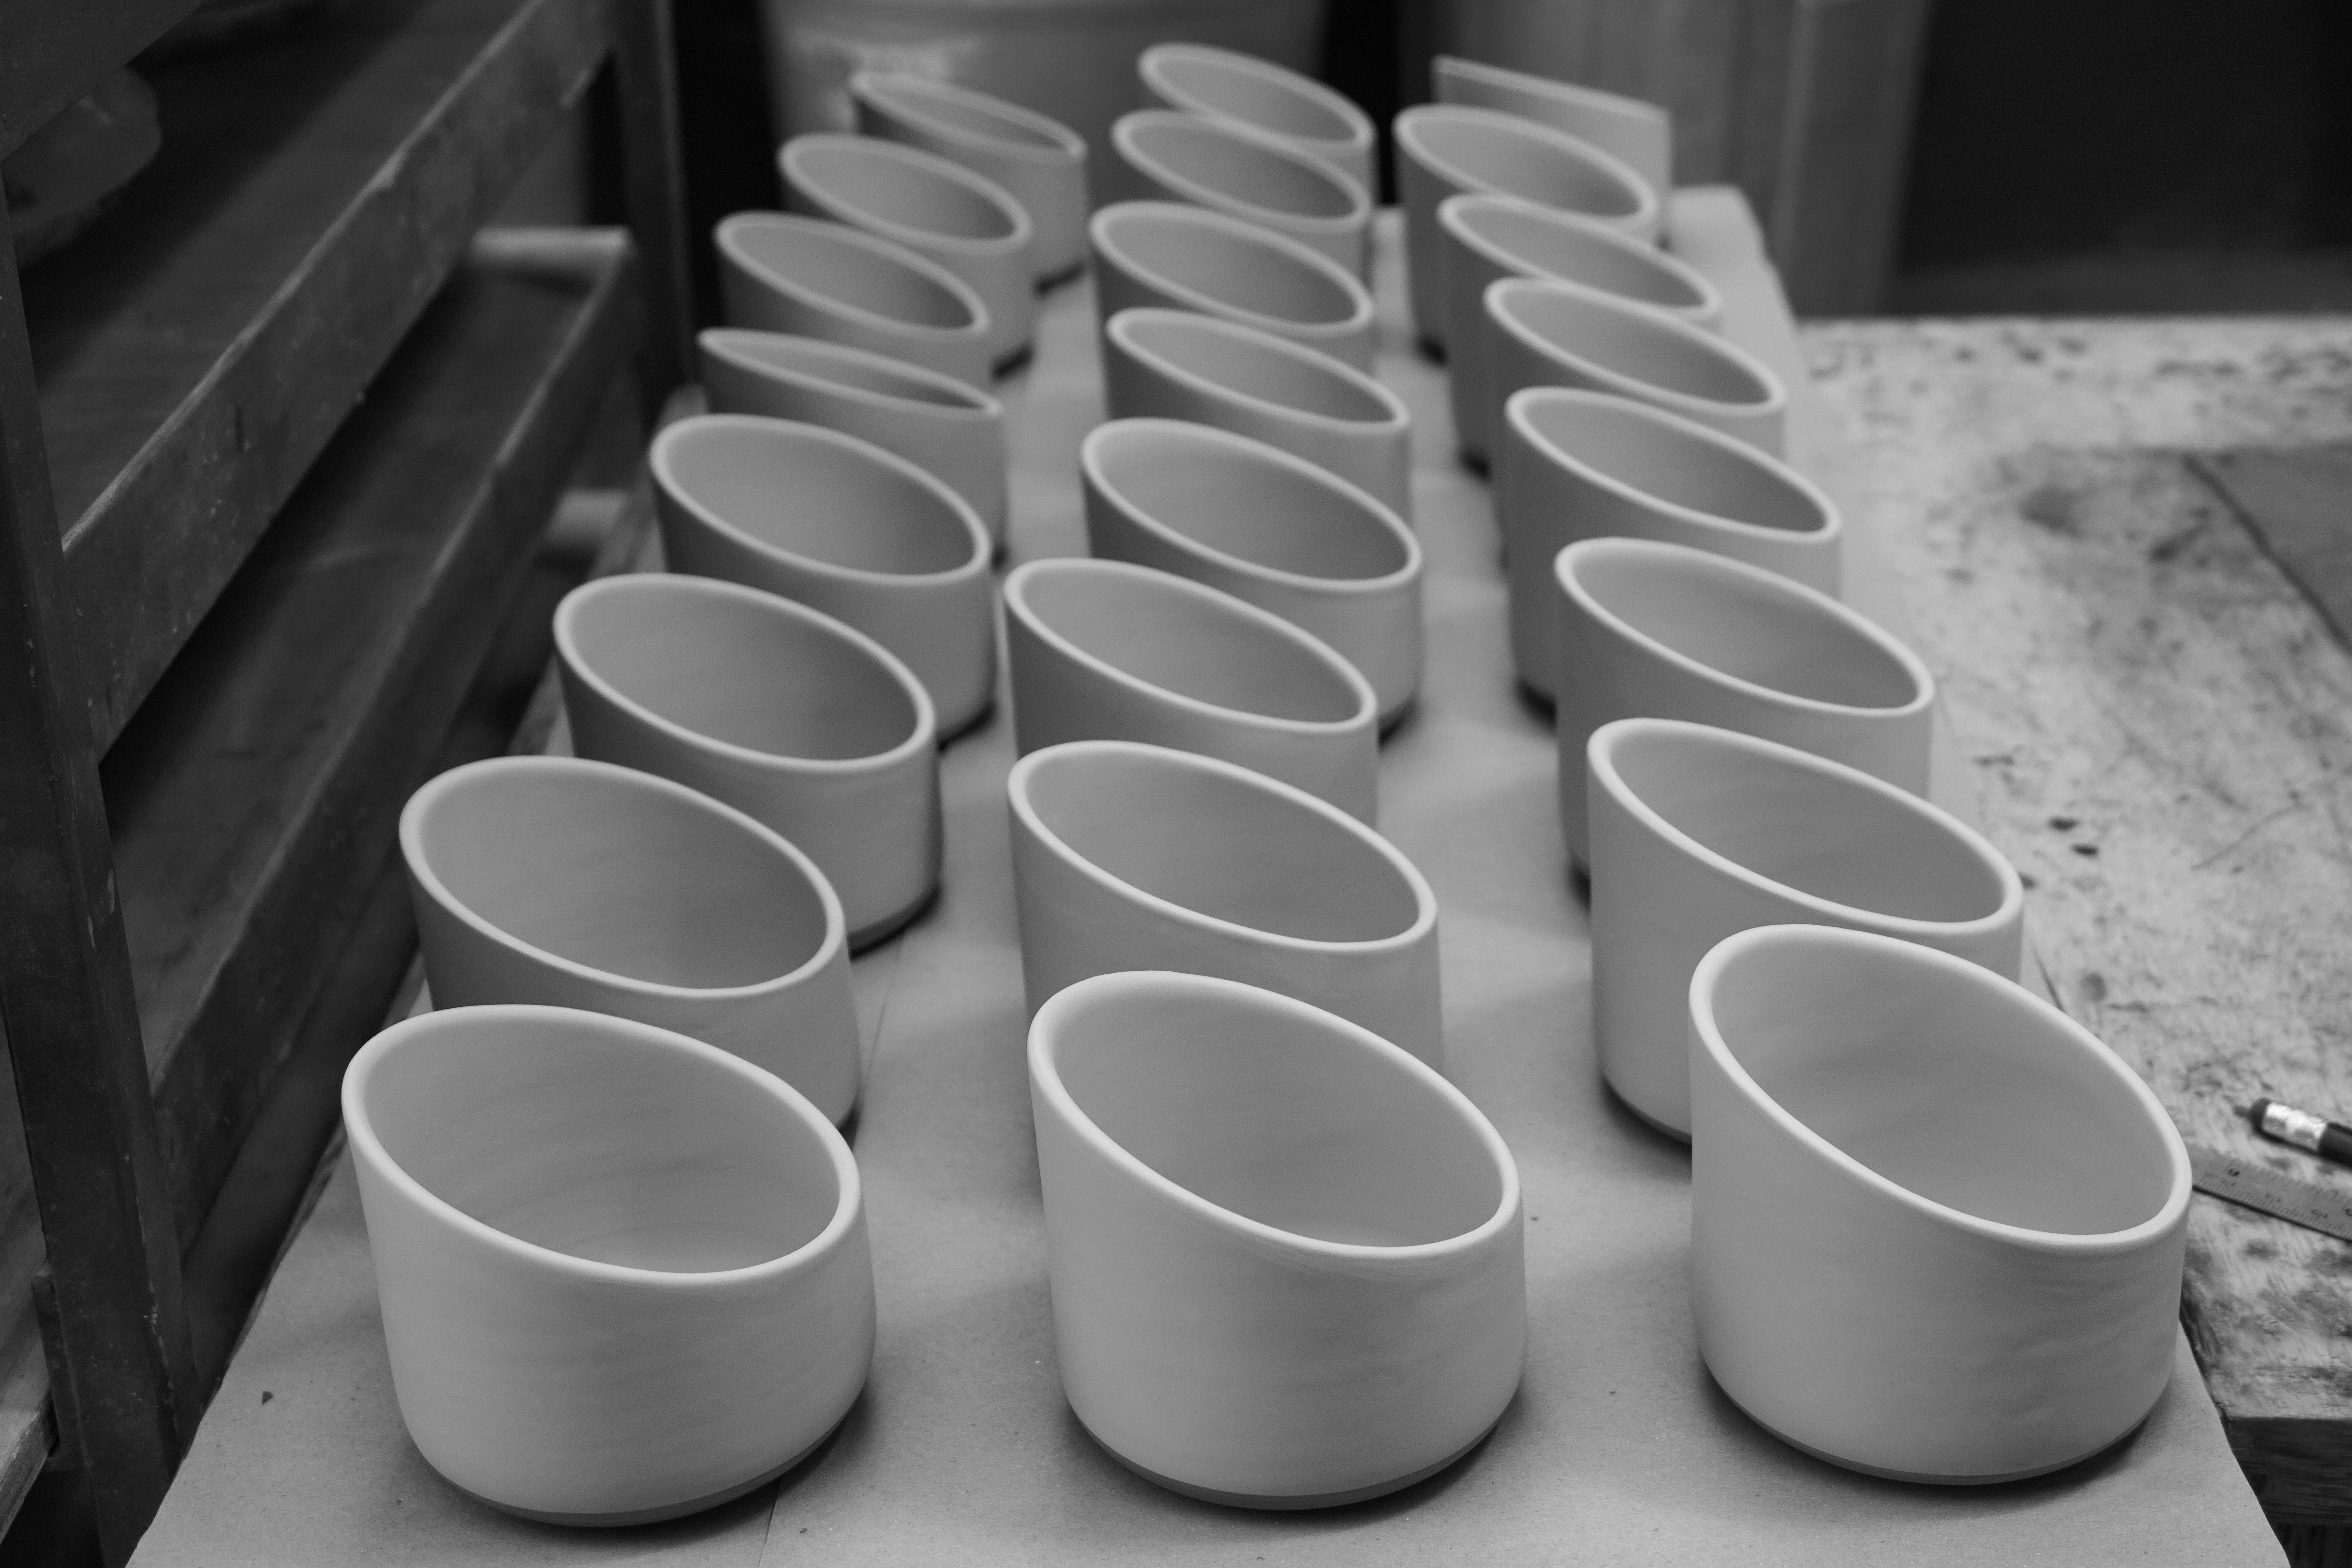 Our handmade clay ceramic shades in various stages of production. Photo supplied by Gaya ceramics